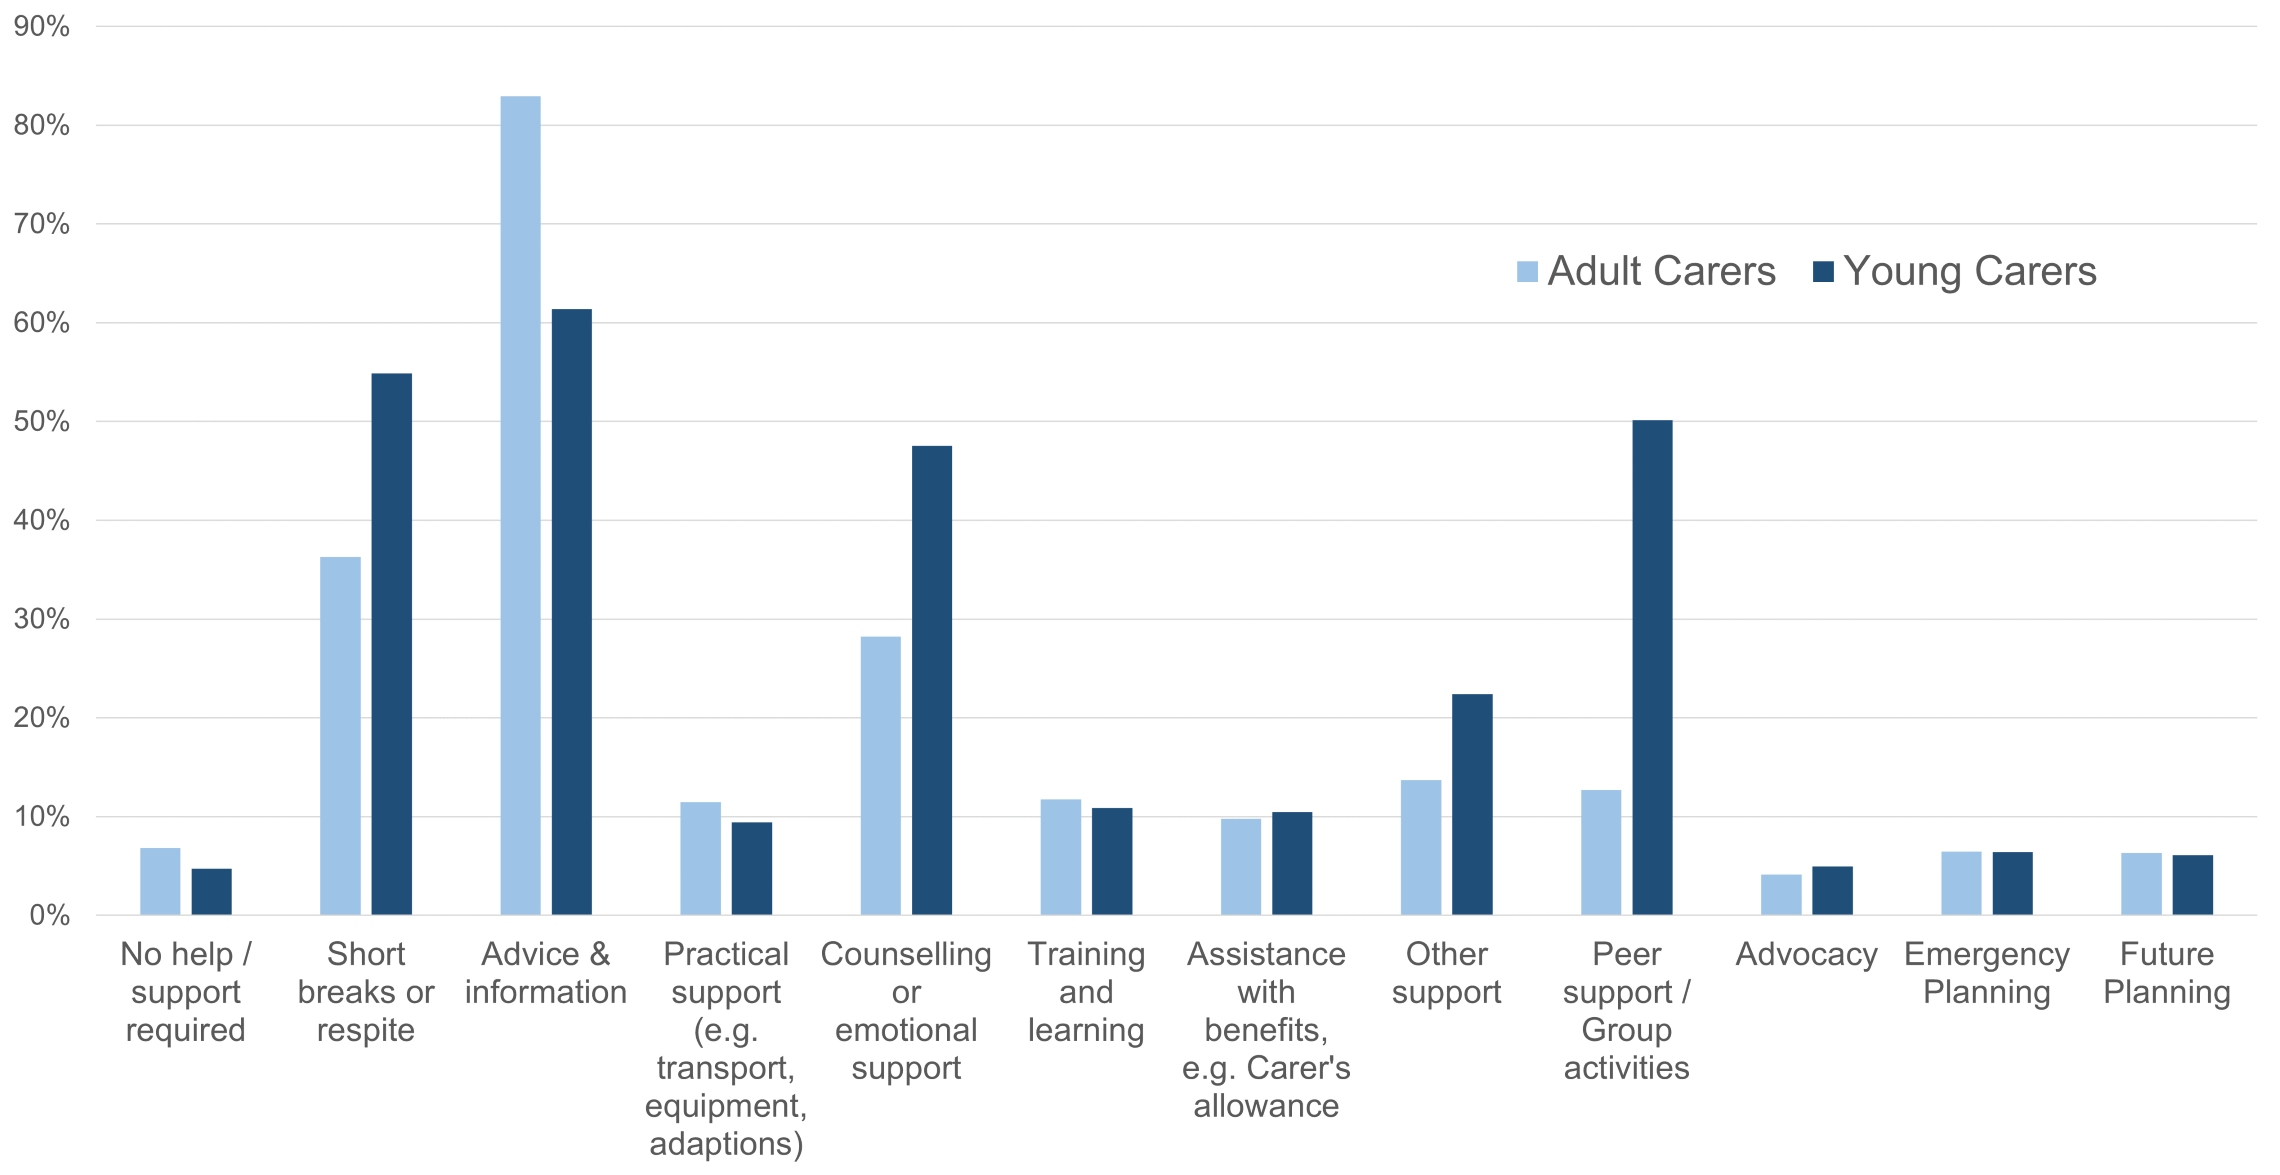 Bar chart showing support provided to young and adult carers. The most common support provided was advice and information followed by short breaks or respite.